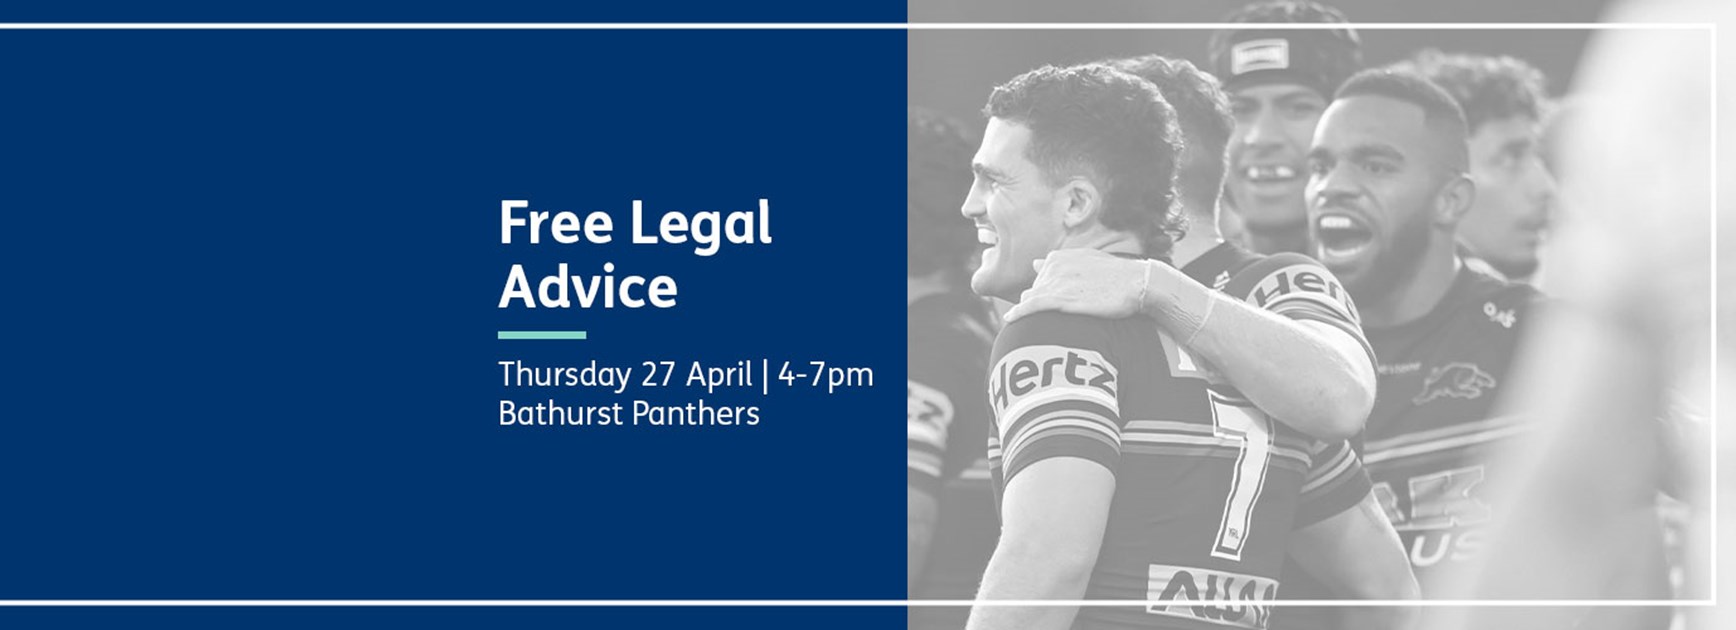 Turner Freeman Lawyers to provide free legal advice at Bathurst Panthers